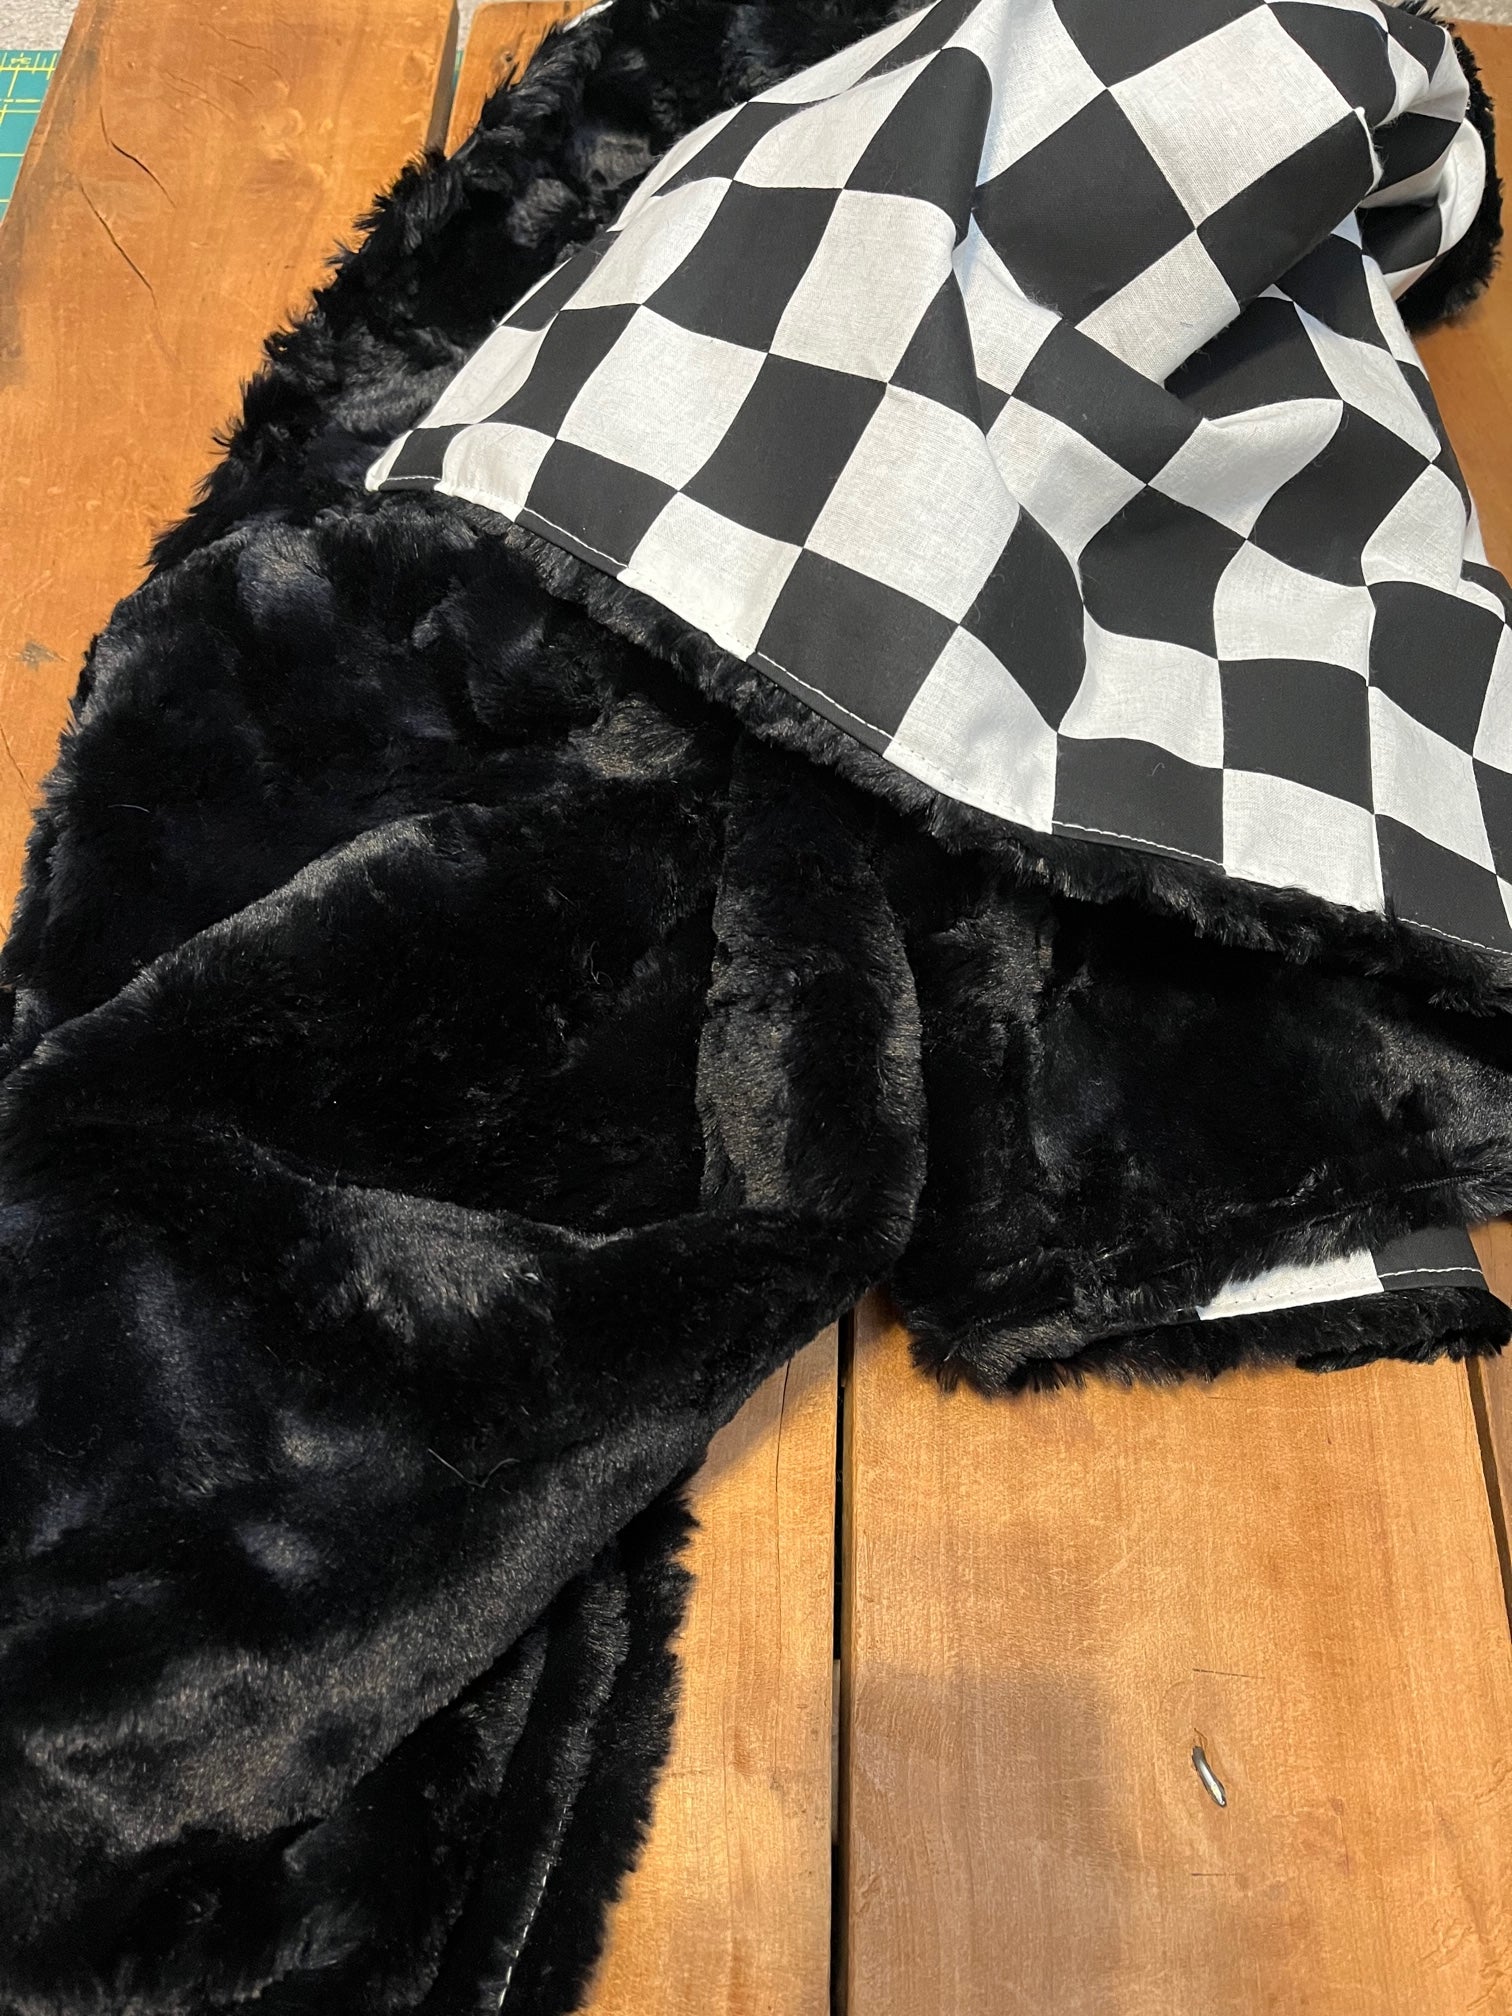 shown with cotton racing check and black fur minky fabric. Limited quanitites of the fur.